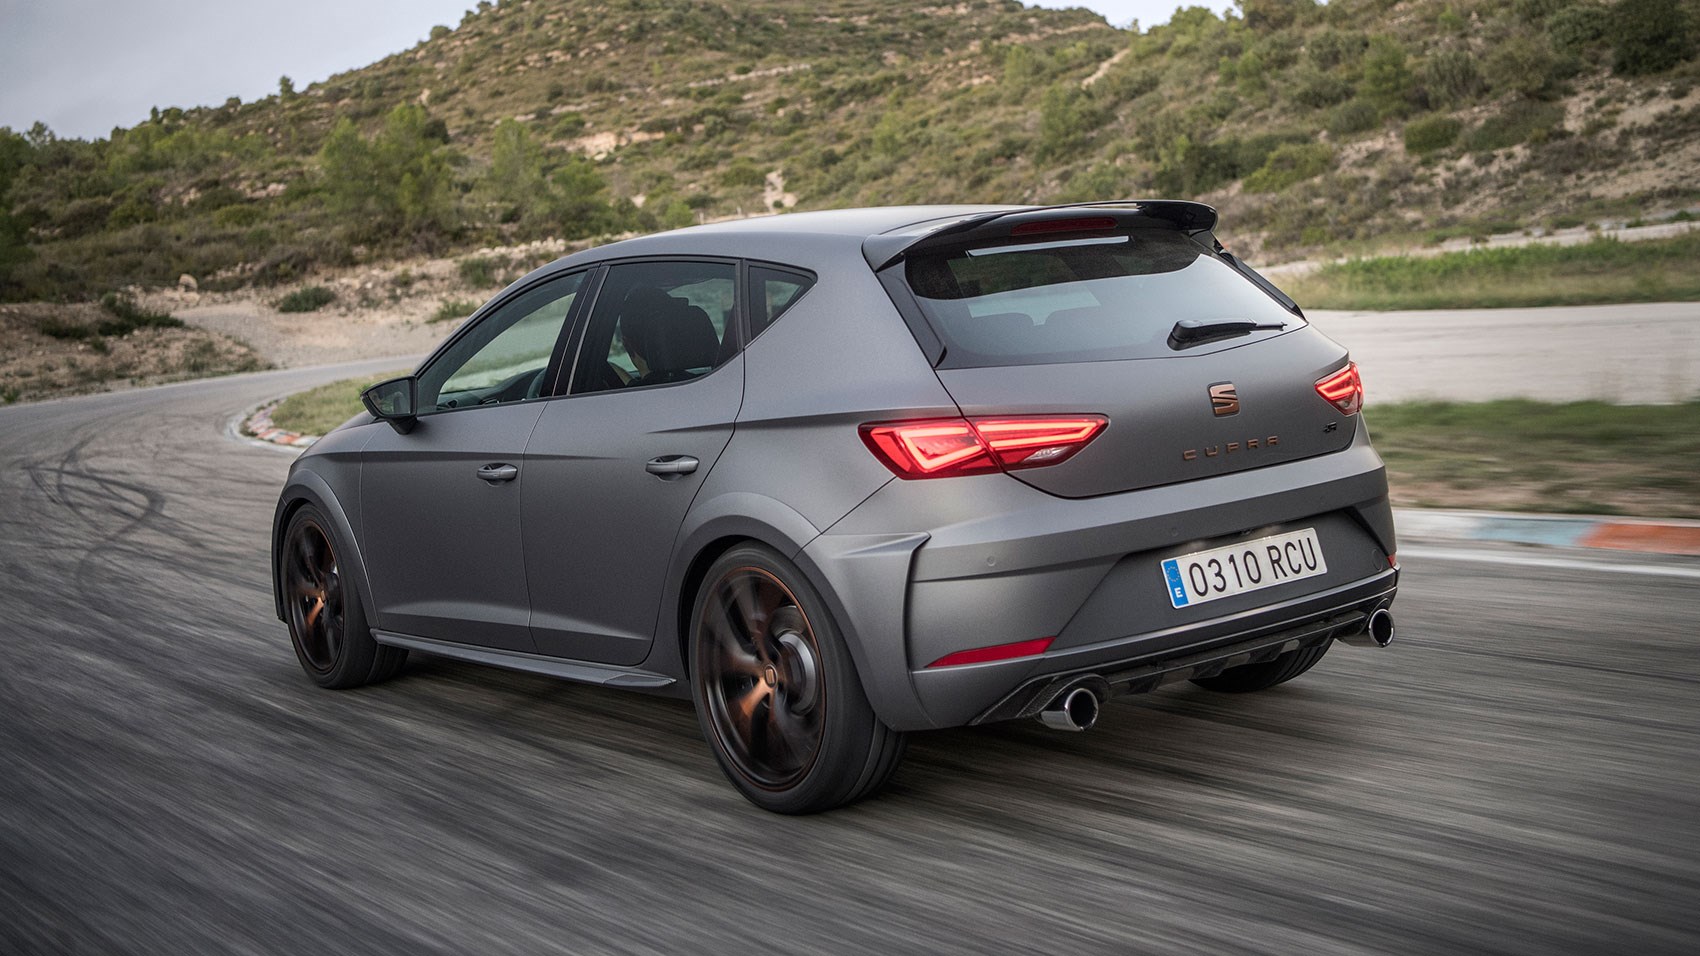 Seat Leon Cupra R review: needs more spice